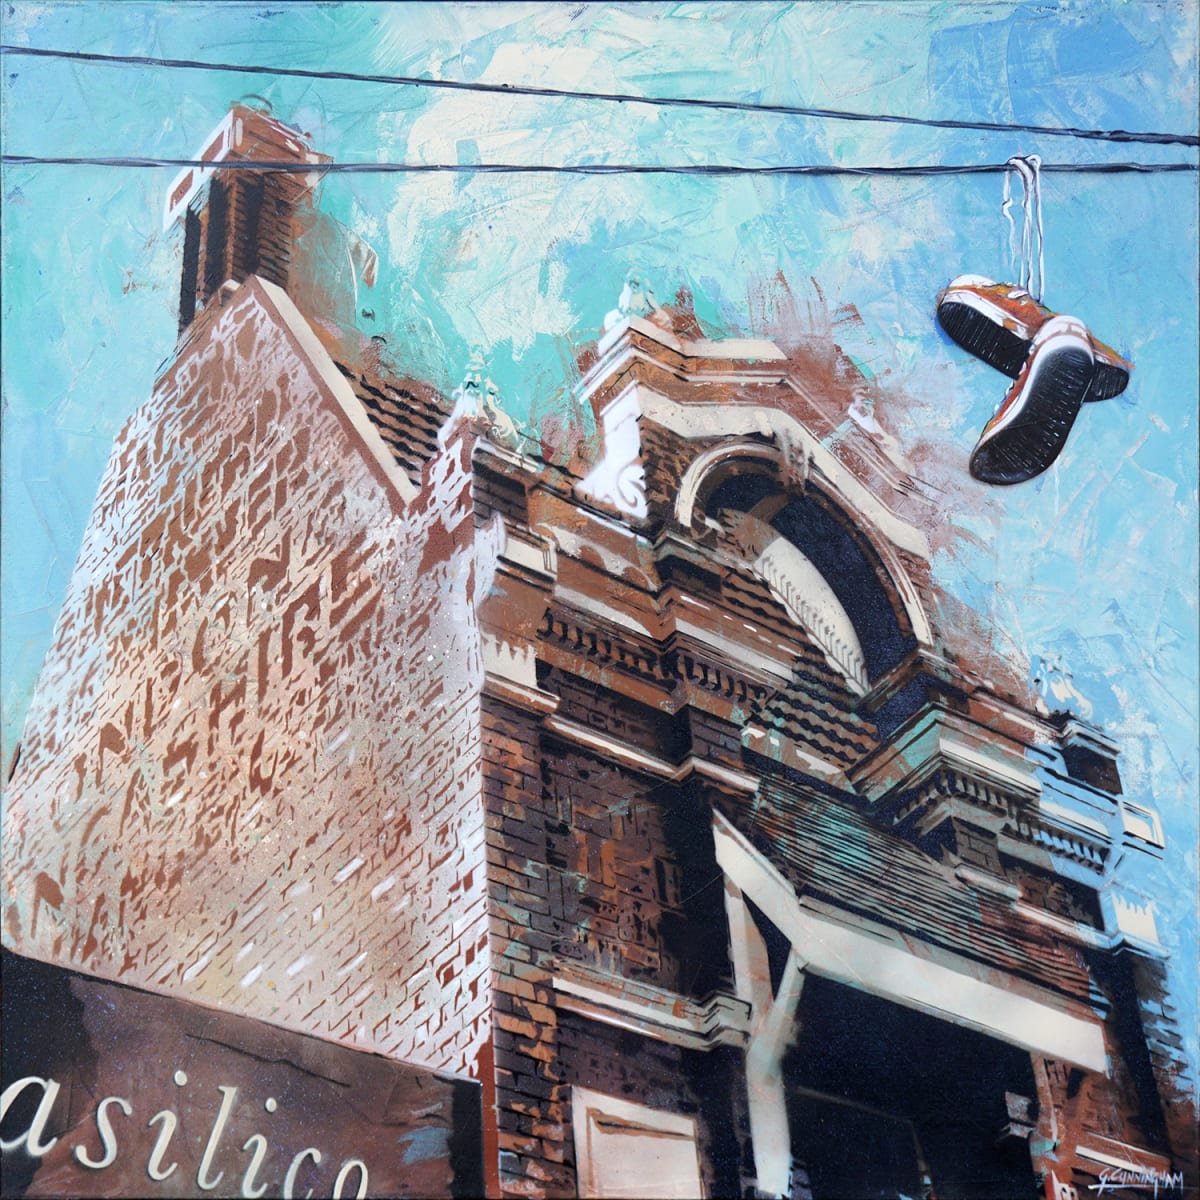 Footloose by Geoff Cunningham  Image: This is based on a photo I took Bridport Street, Albert Park Melbourne. Though I had walked this street dozens of times a had never noticed the beautiful ghost signage on the side of this amazing building - sometimes we all need to change our perspectives and just look up…